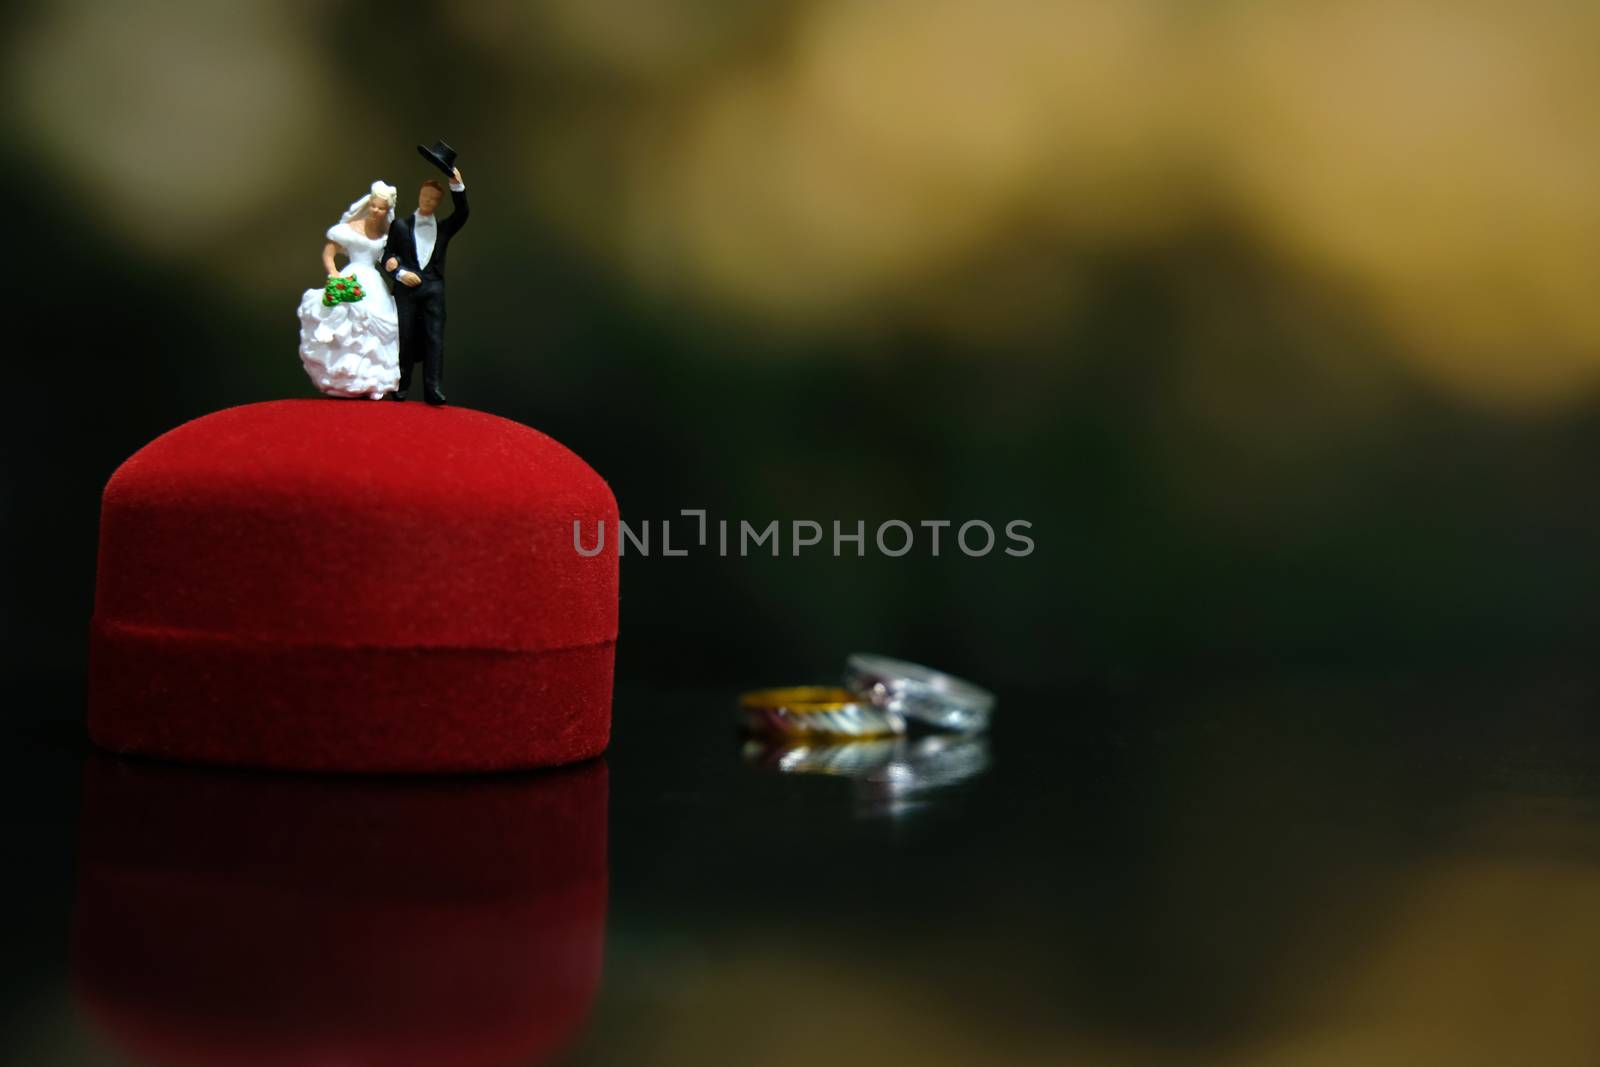 Miniature wedding concept. Bride and groom walking out make greeting above their wedding ring box. image photo by Macrostud